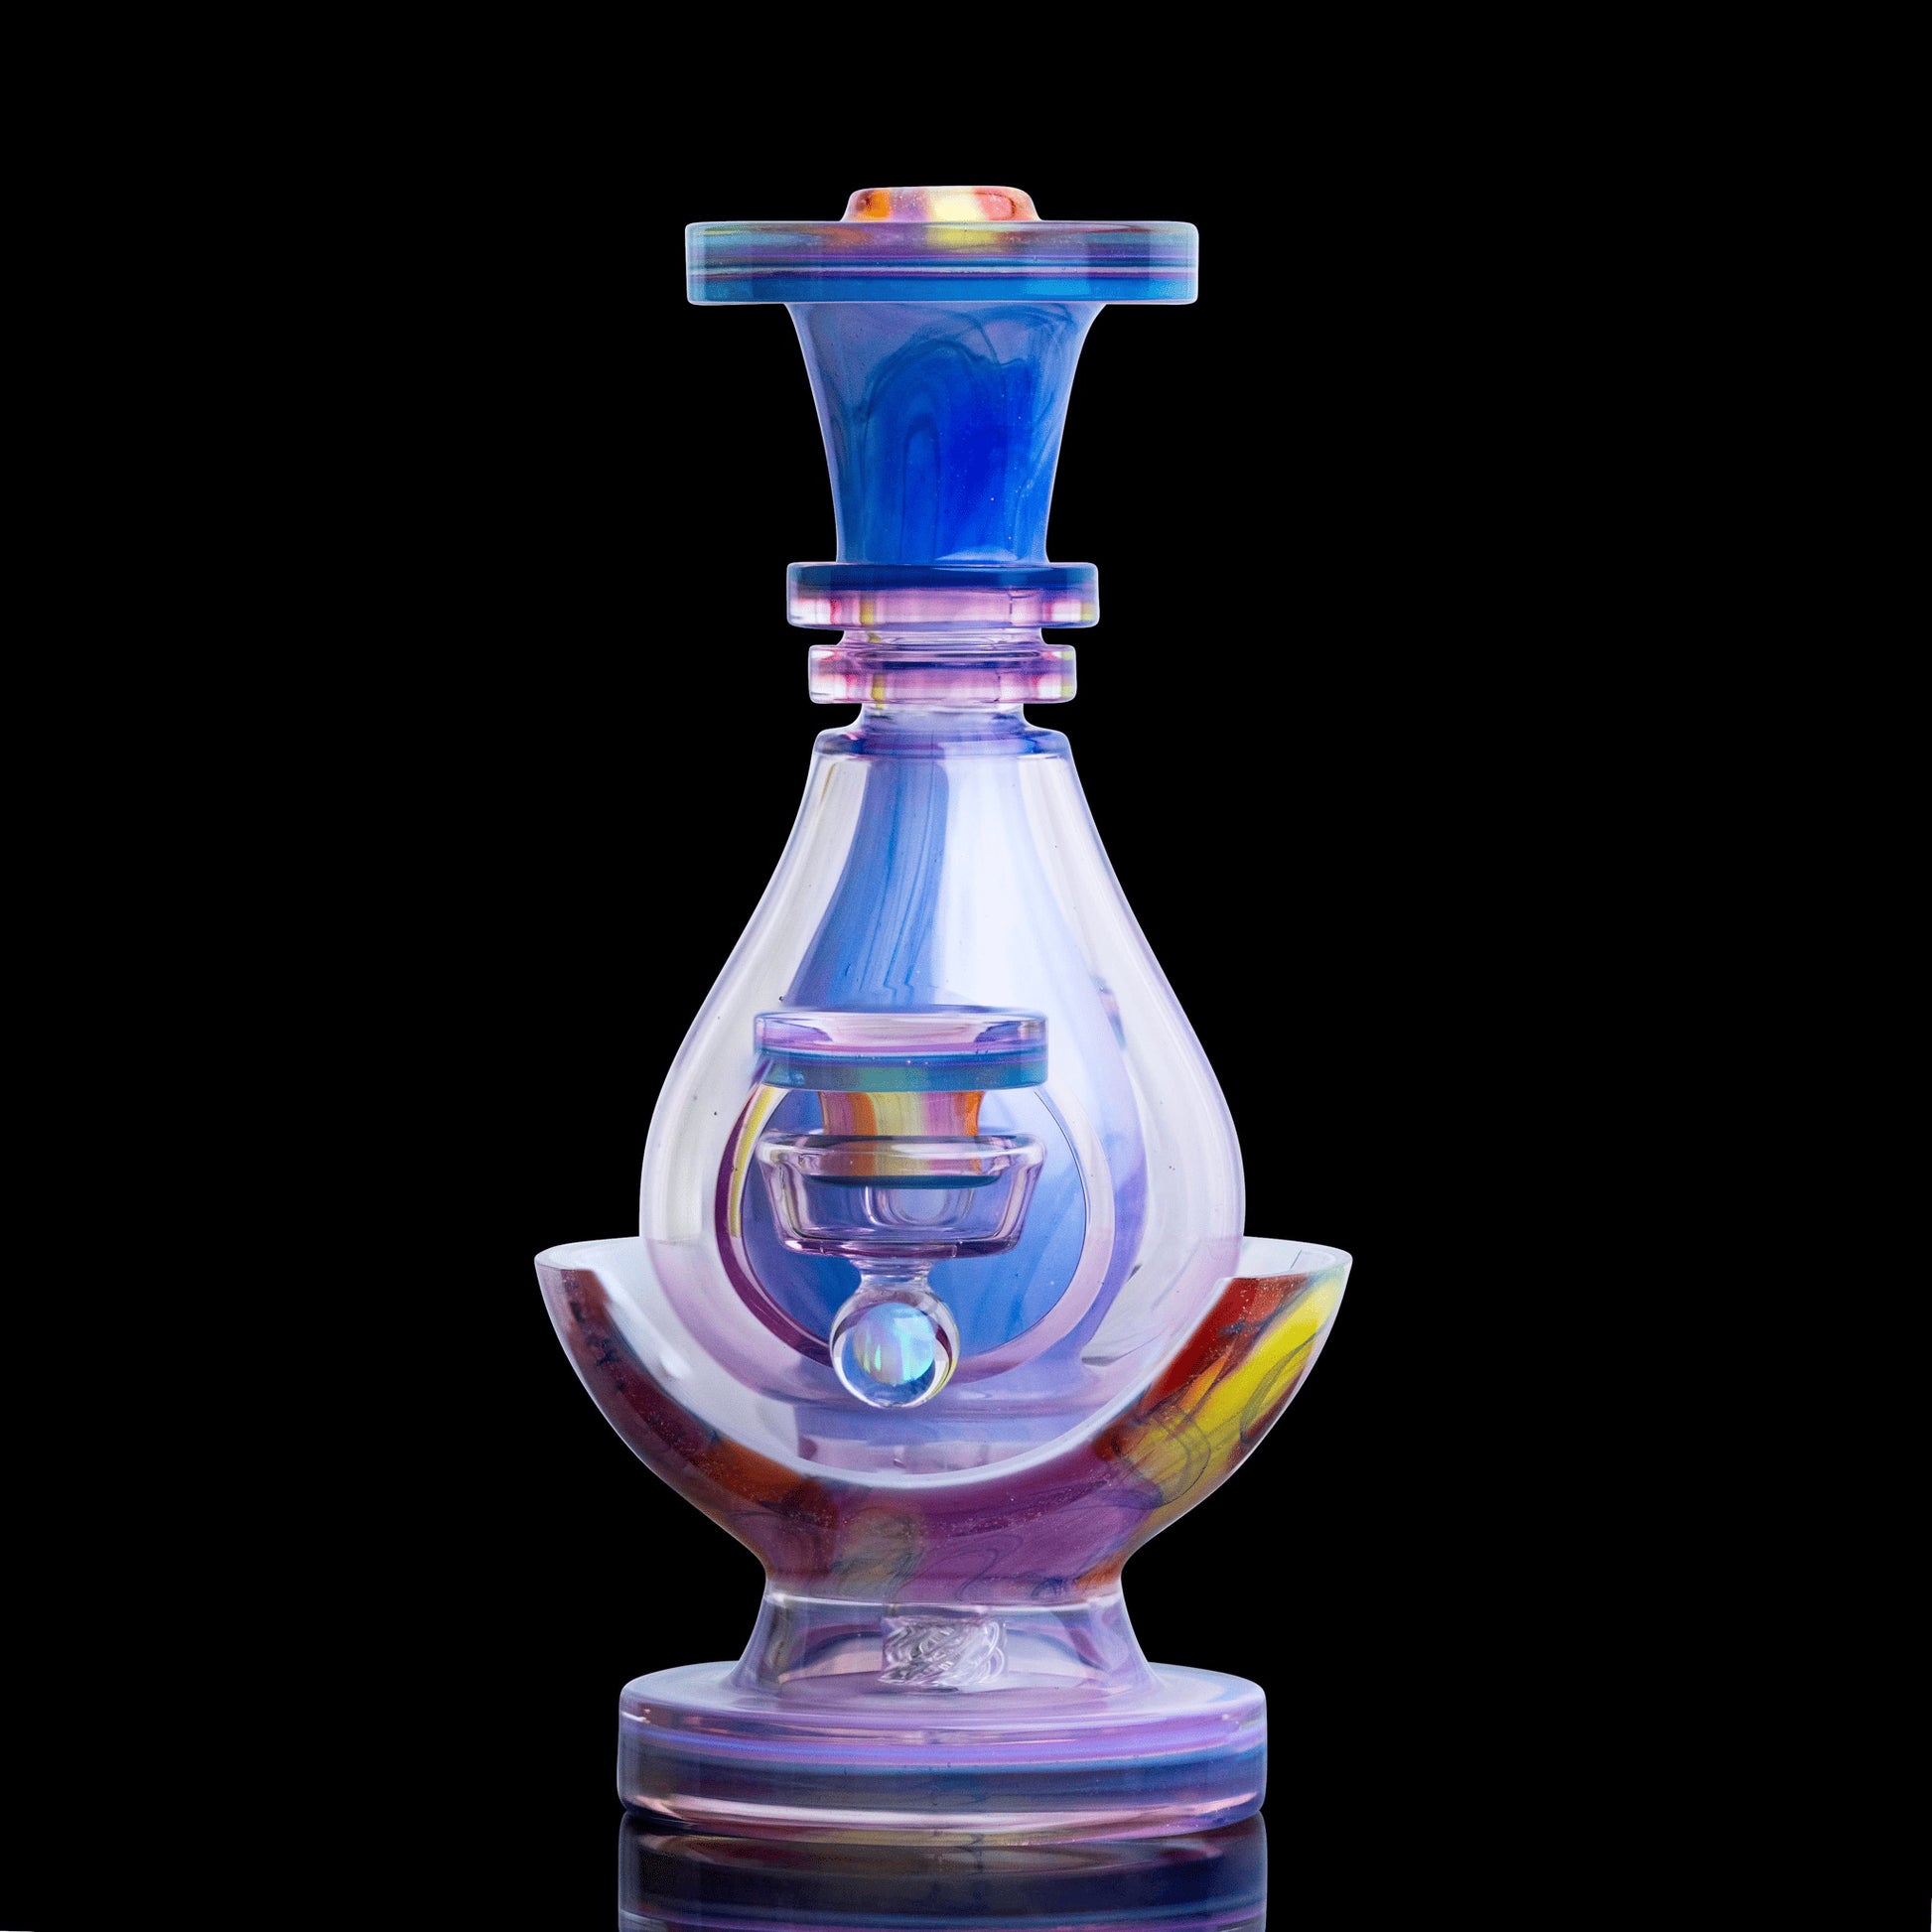 exquisite design of the Scribble Collab Rig by Scolari Glass &amp; Scomo Moanet (2021)